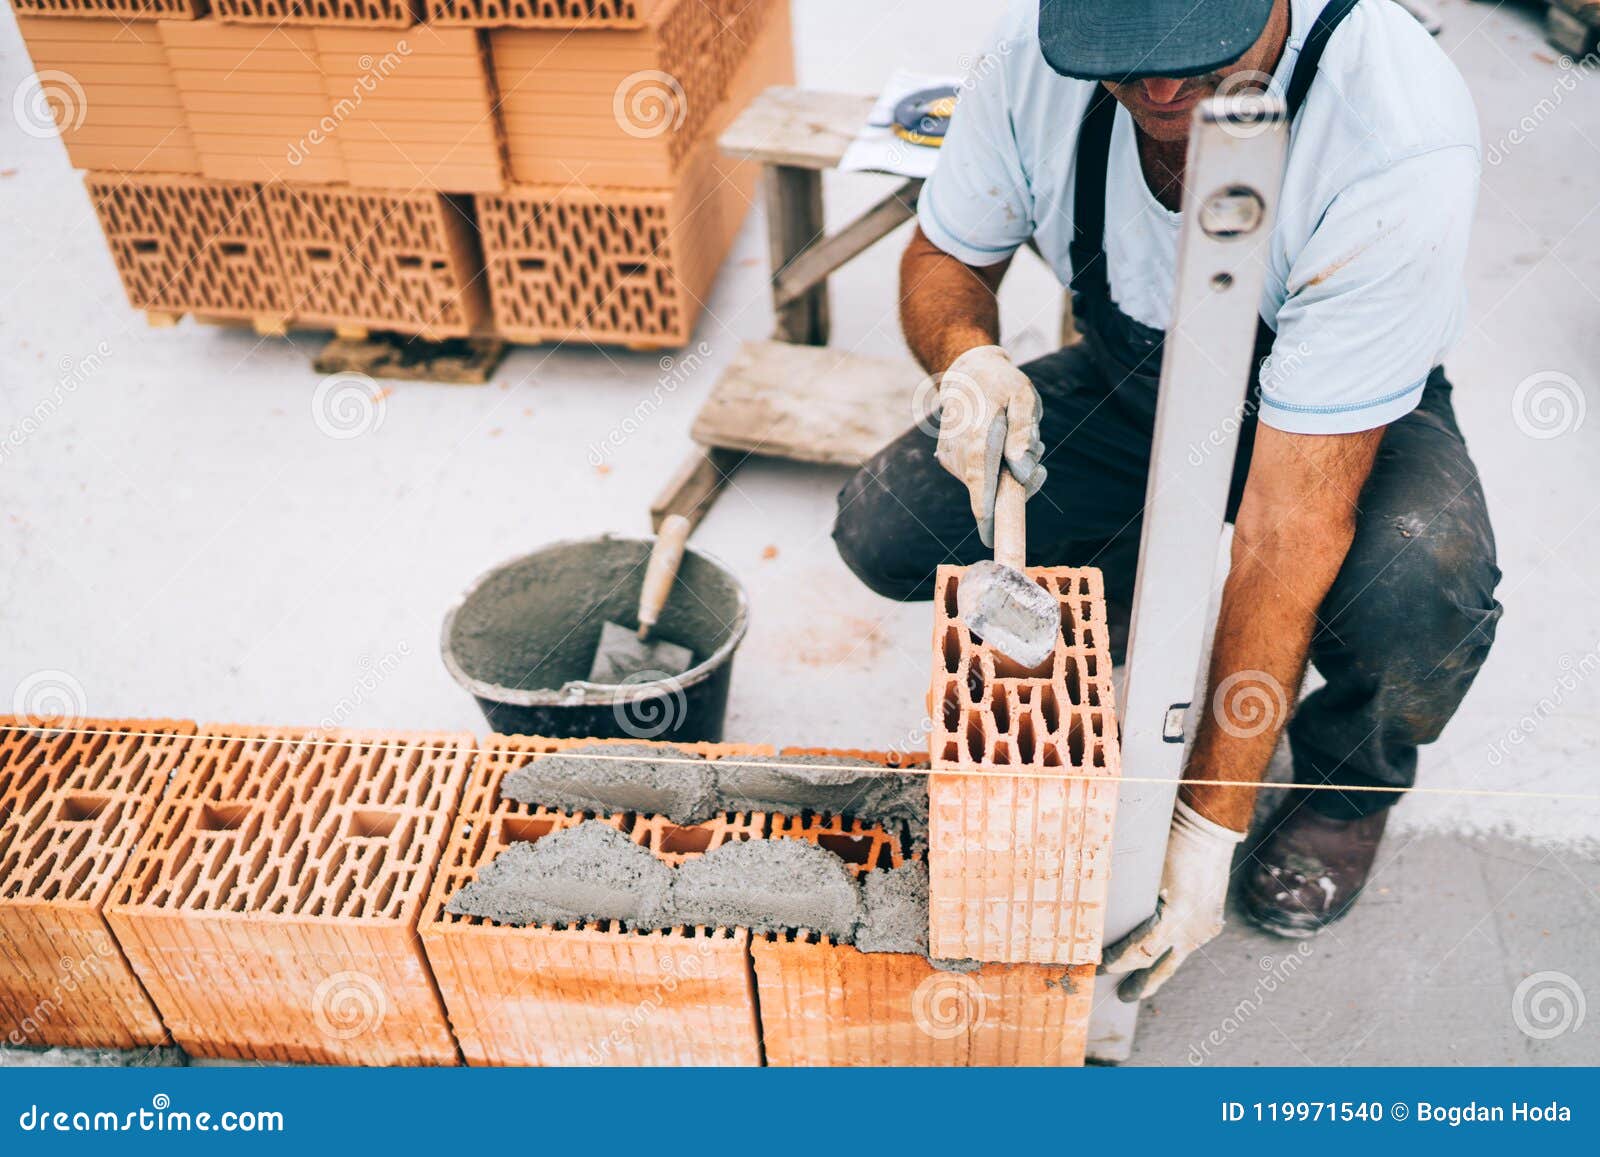 professional construction worker building walls and bricklaying rows of bricks